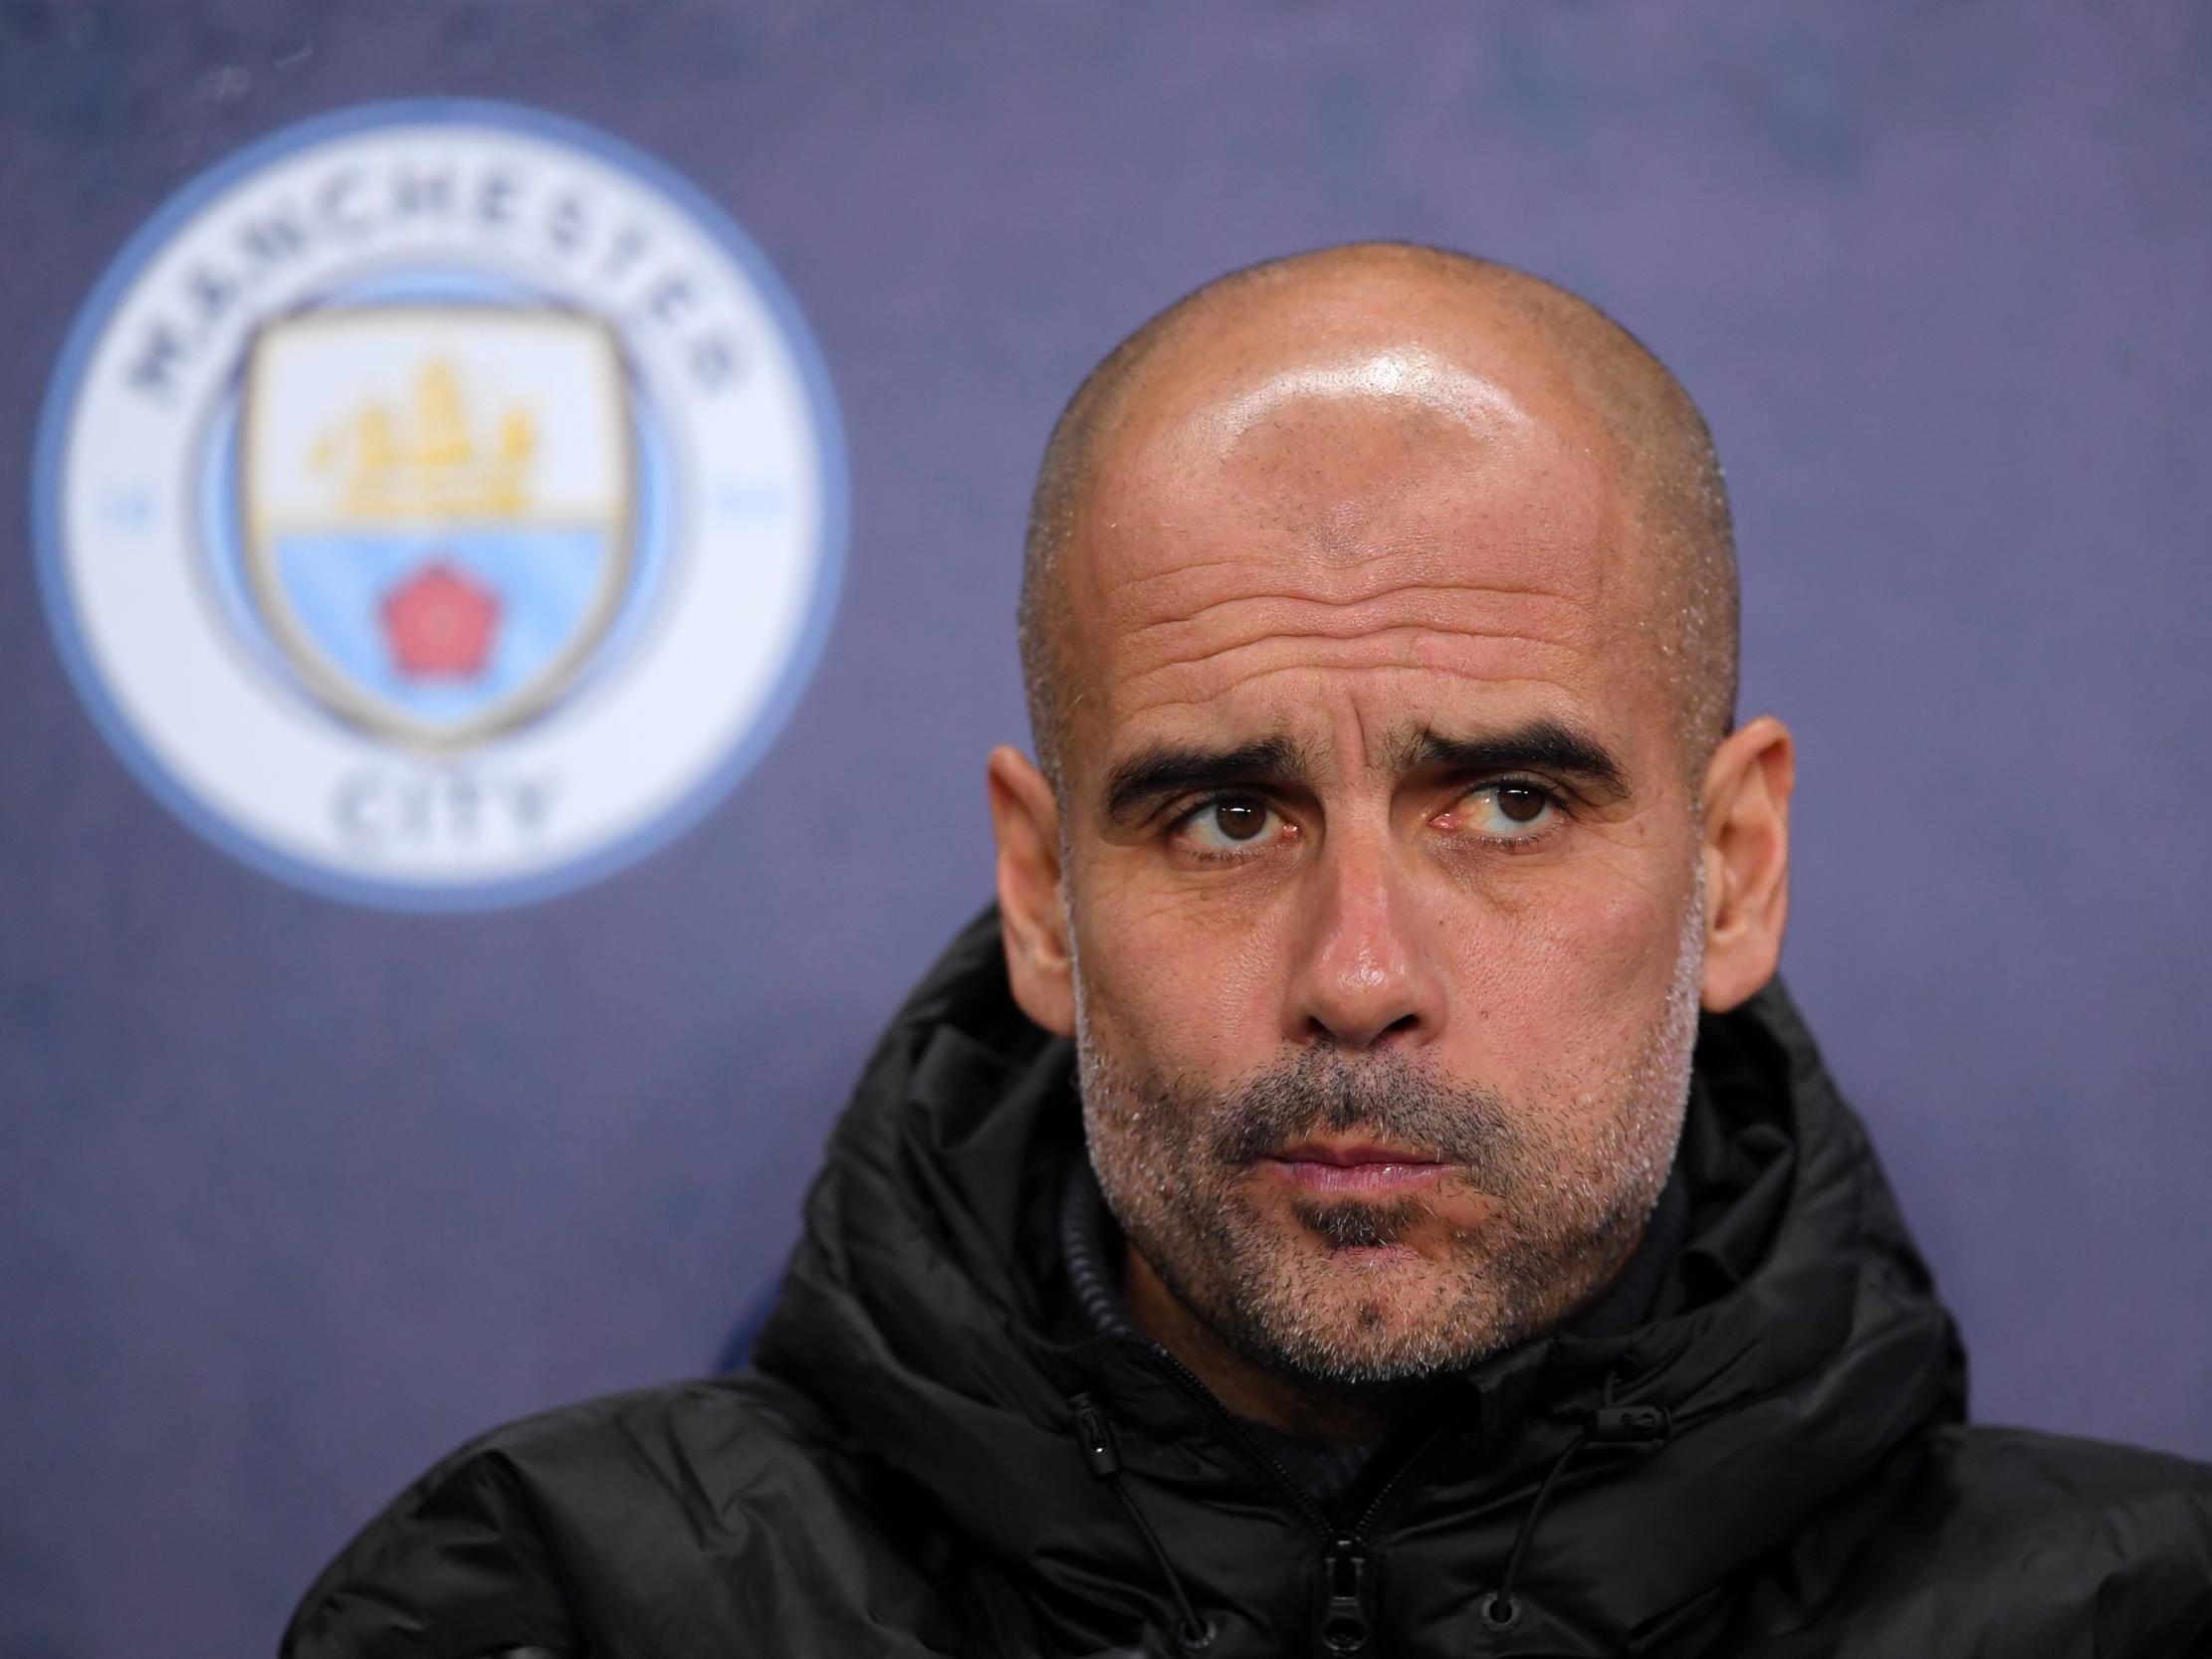 Manchester City chief executive hits out at Uefa over Champions League ban